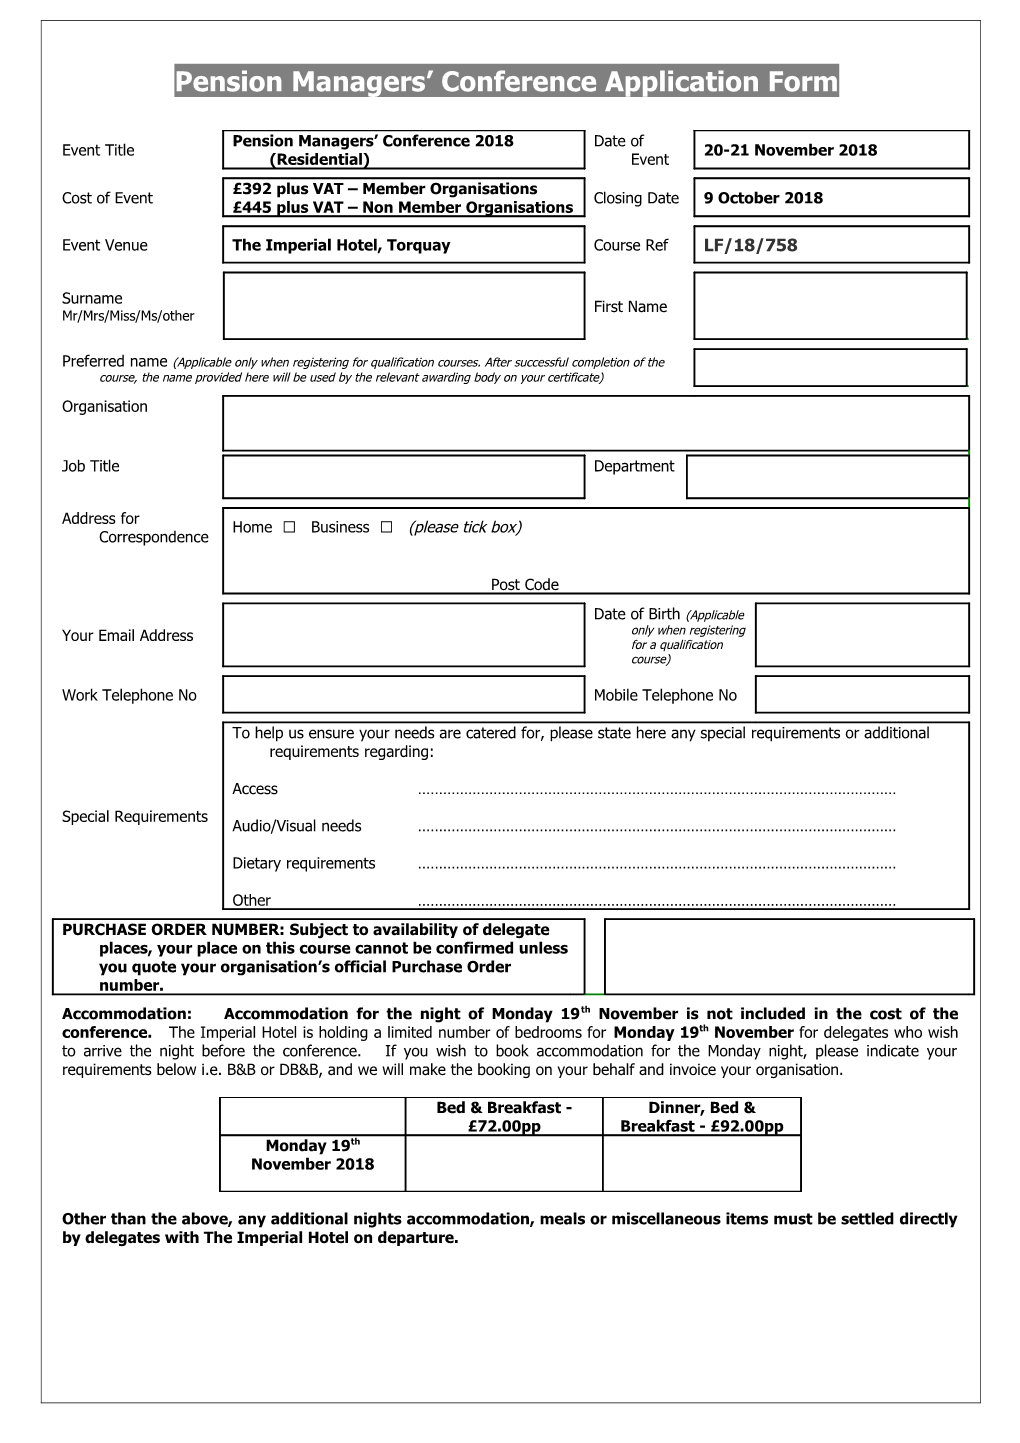 Pension Managers Conference Application Form